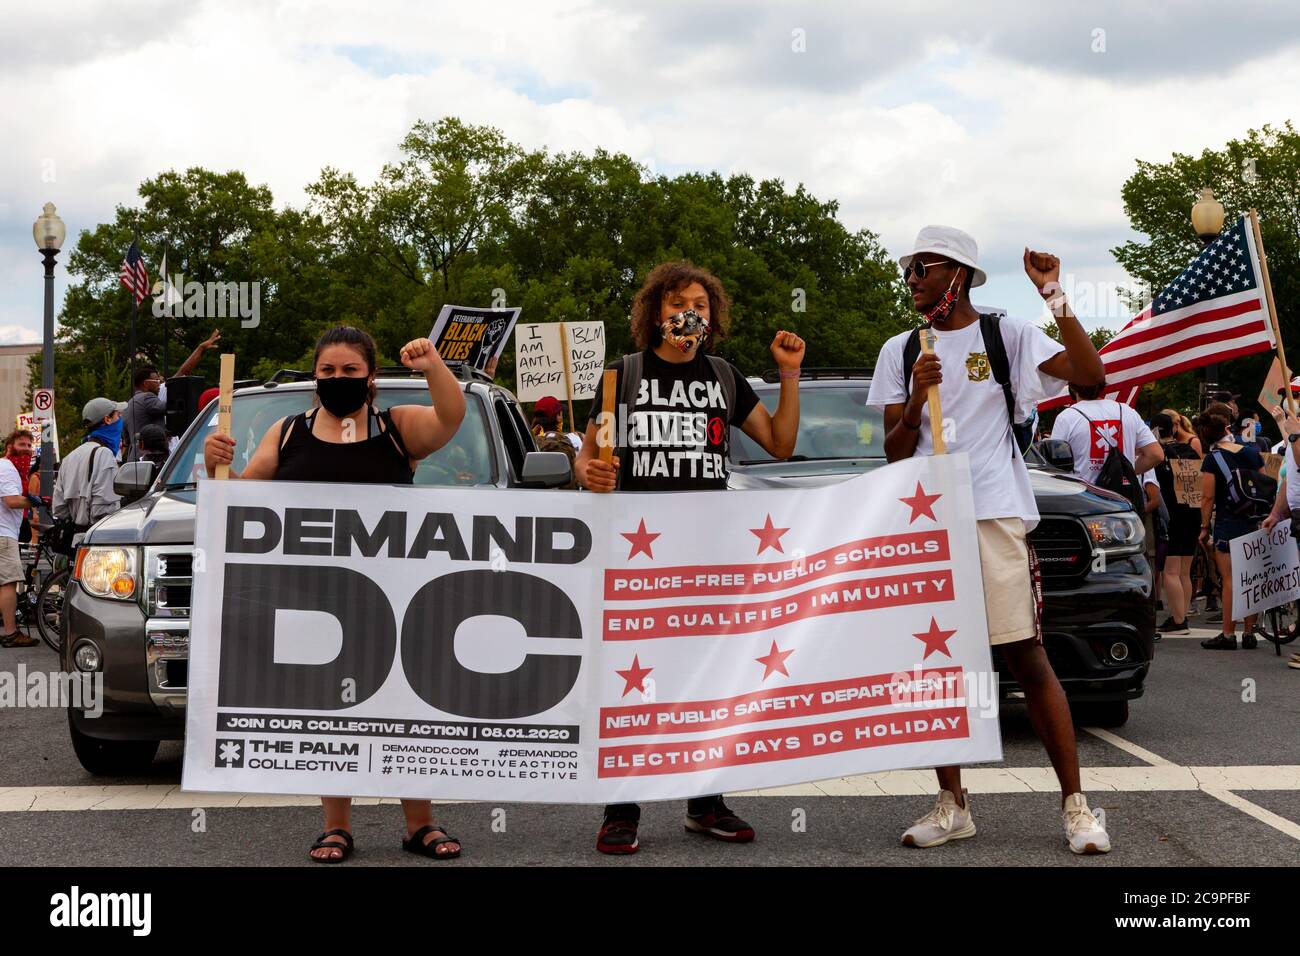 Washington, DC, USA. 1st Aug, 2020. Pictured: Protest leaders in position holding the banner to begin the Demand DC march, hosted by The Palm Collective. Protesters are demanding four changes from city government: police-free schools, an end to qualified immunity for police officers, a new public safety department, and designation of election day as a holiday. Credit: Allison C Bailey/Alamy Credit: Allison Bailey/Alamy Live News Stock Photo